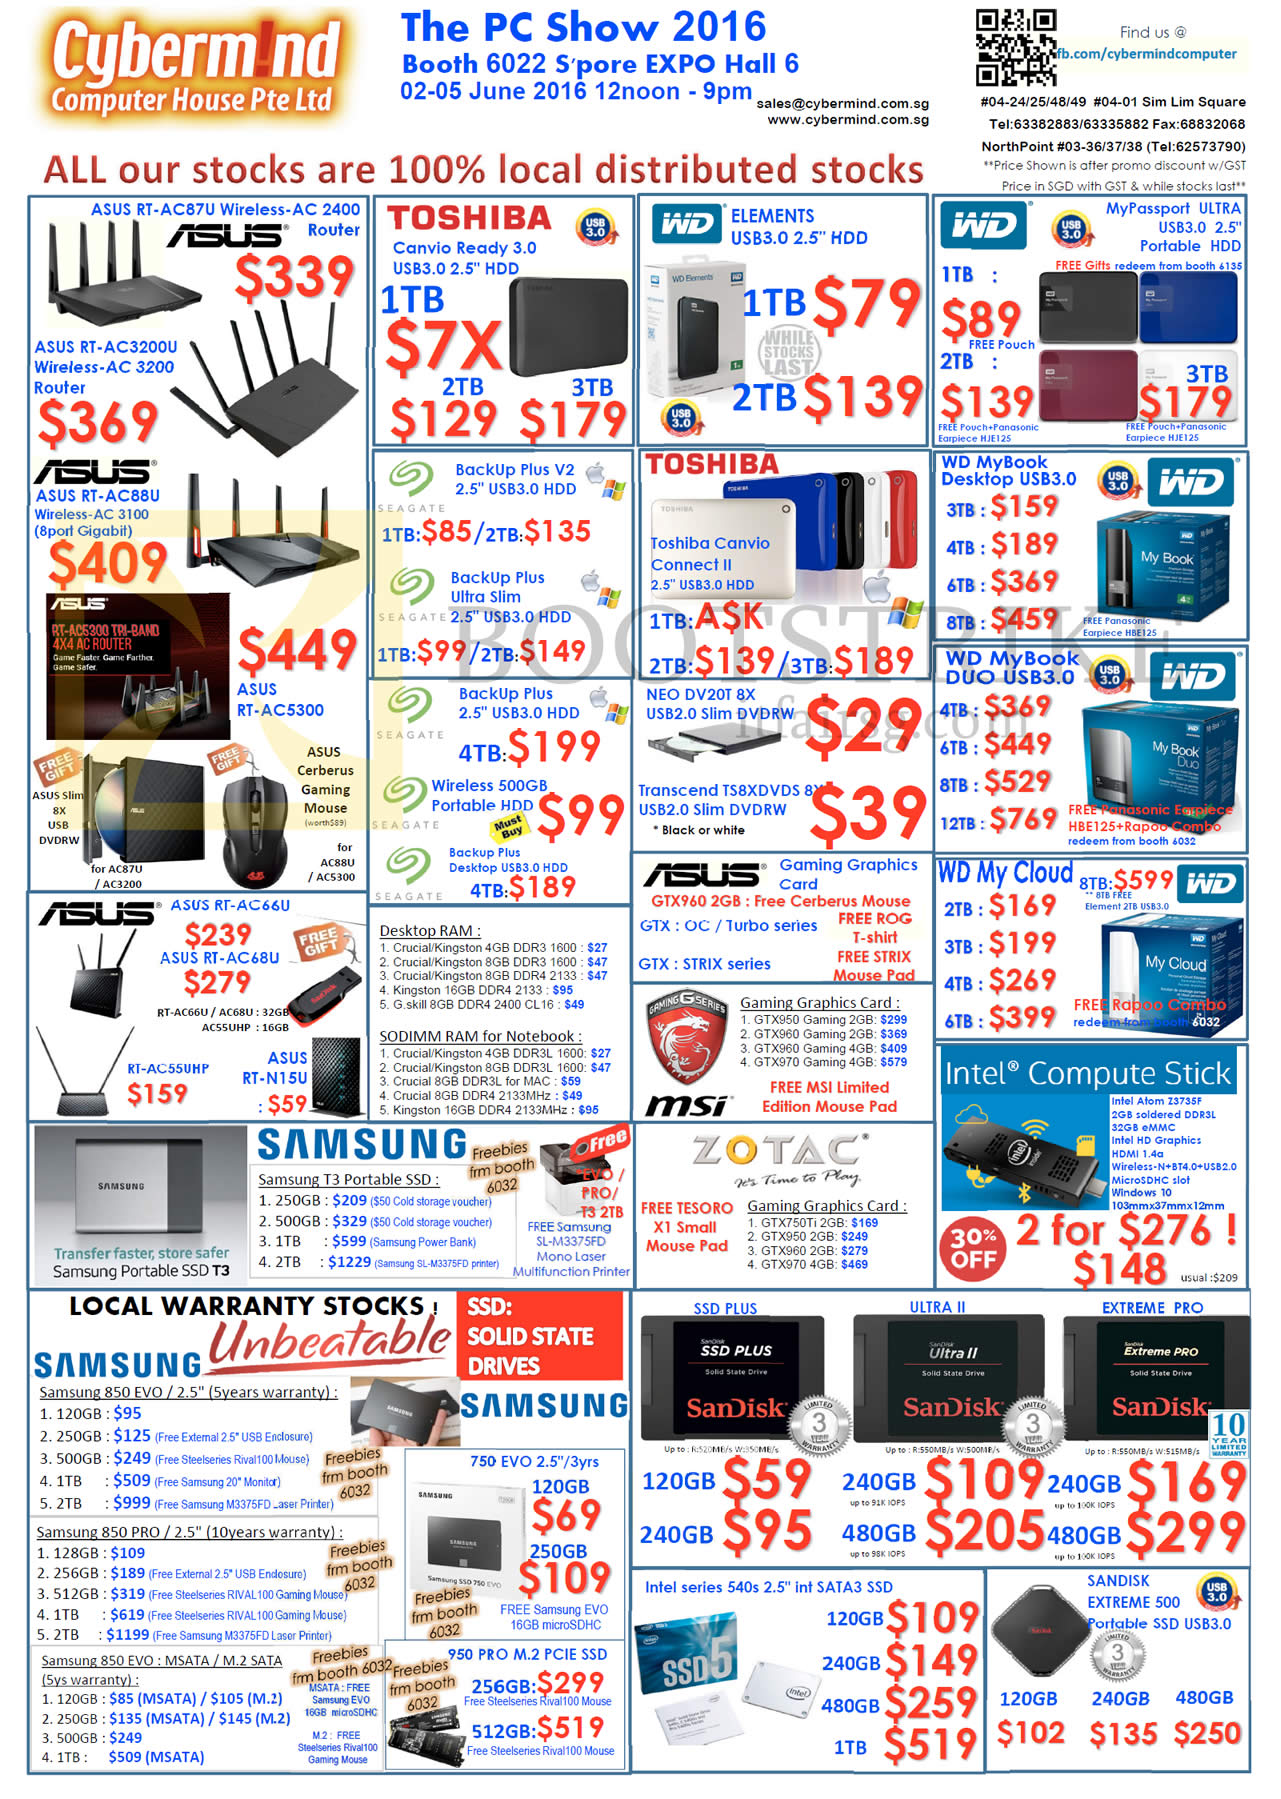 PC SHOW 2016 price list image brochure of Cybermind Wireless Routers, External Hard Disk Drives, Portable SSDs, SD Cards, SSDs, Asus, Toshiba, Western Digital, BackUp Plus, Samsung, Zotac